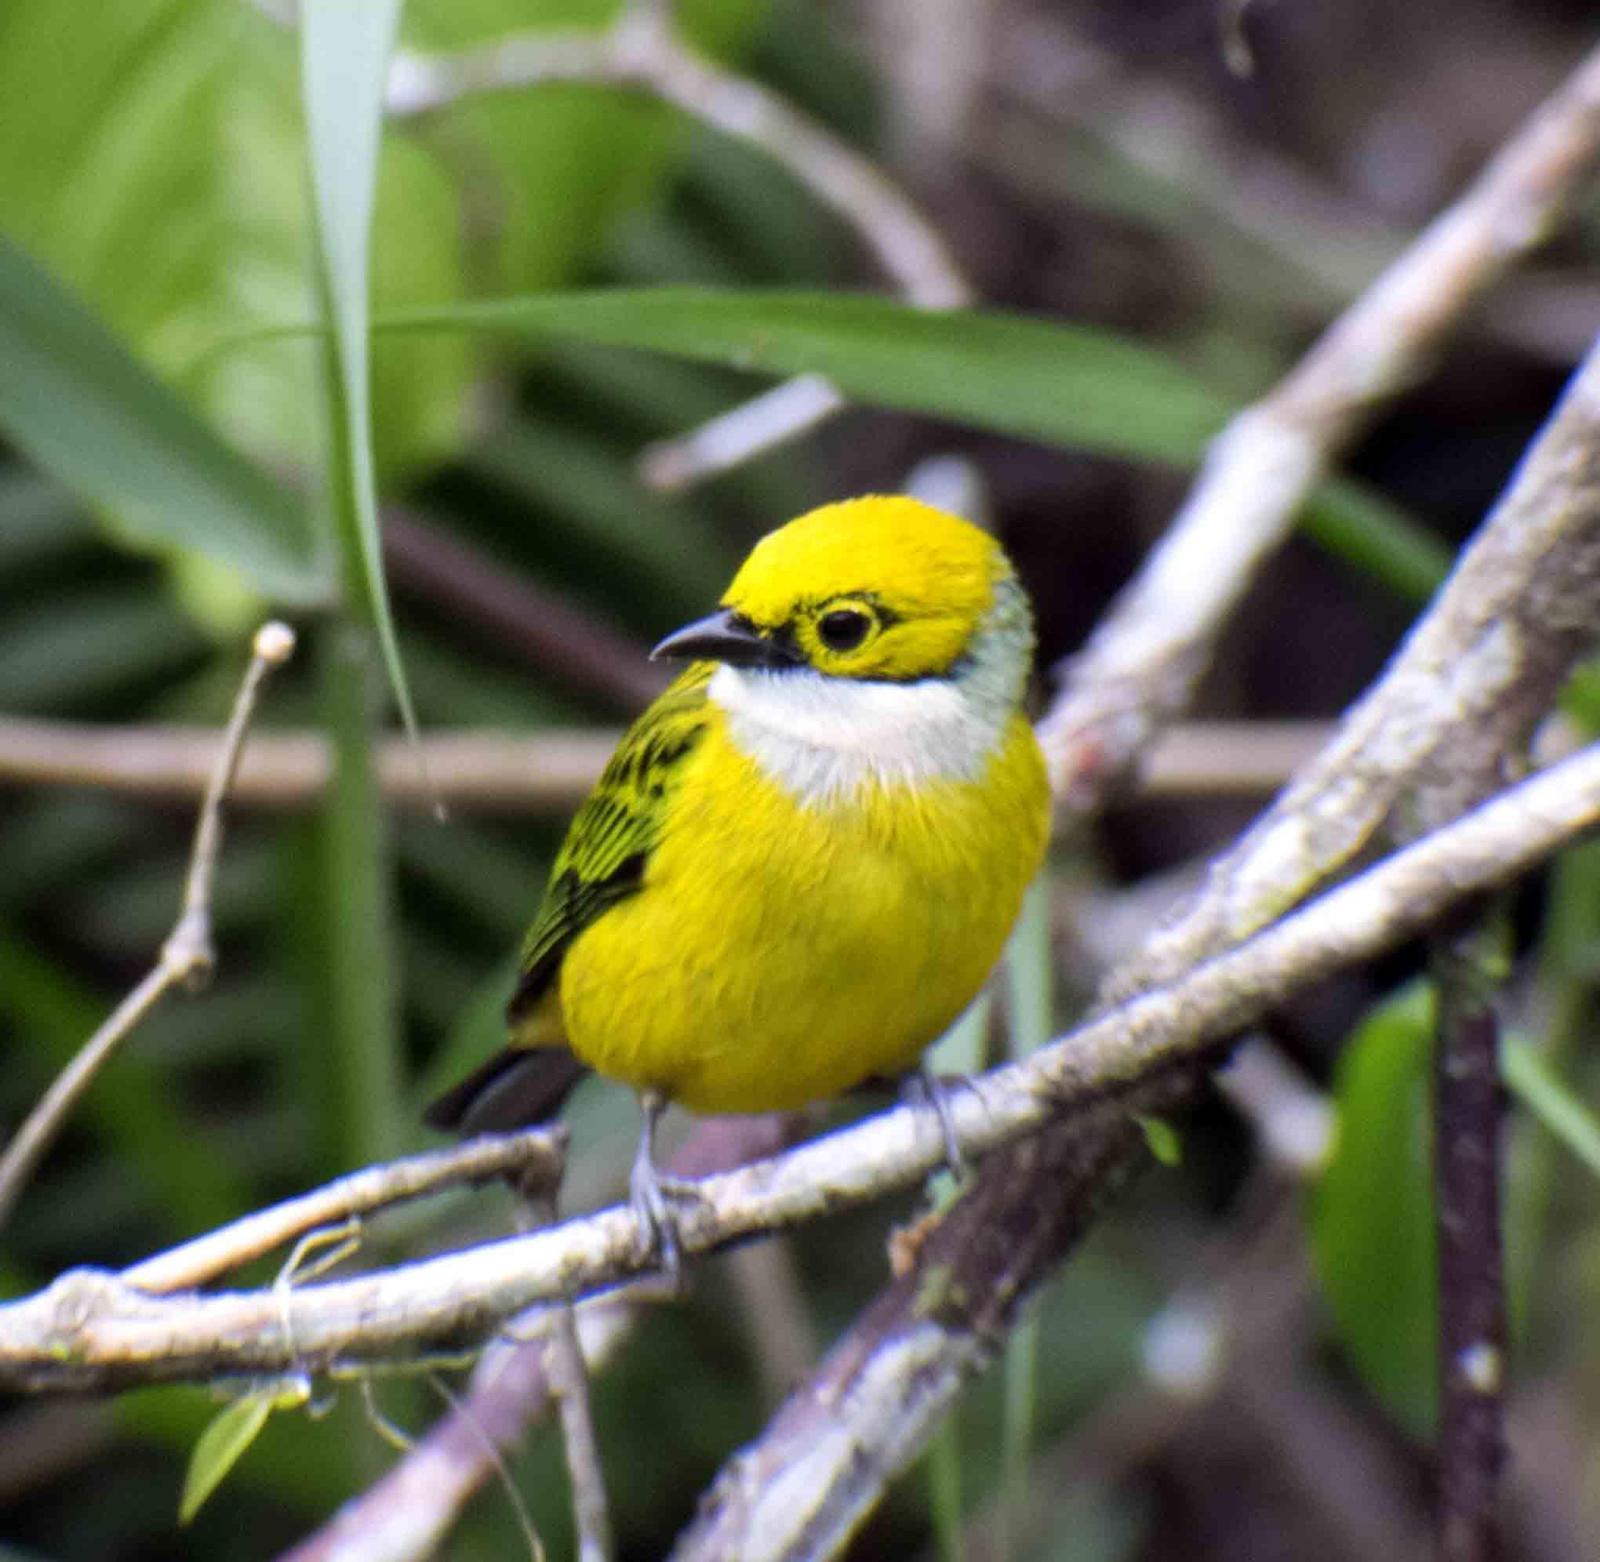 Silver-throated Tanager Photo by Bob Hasenick